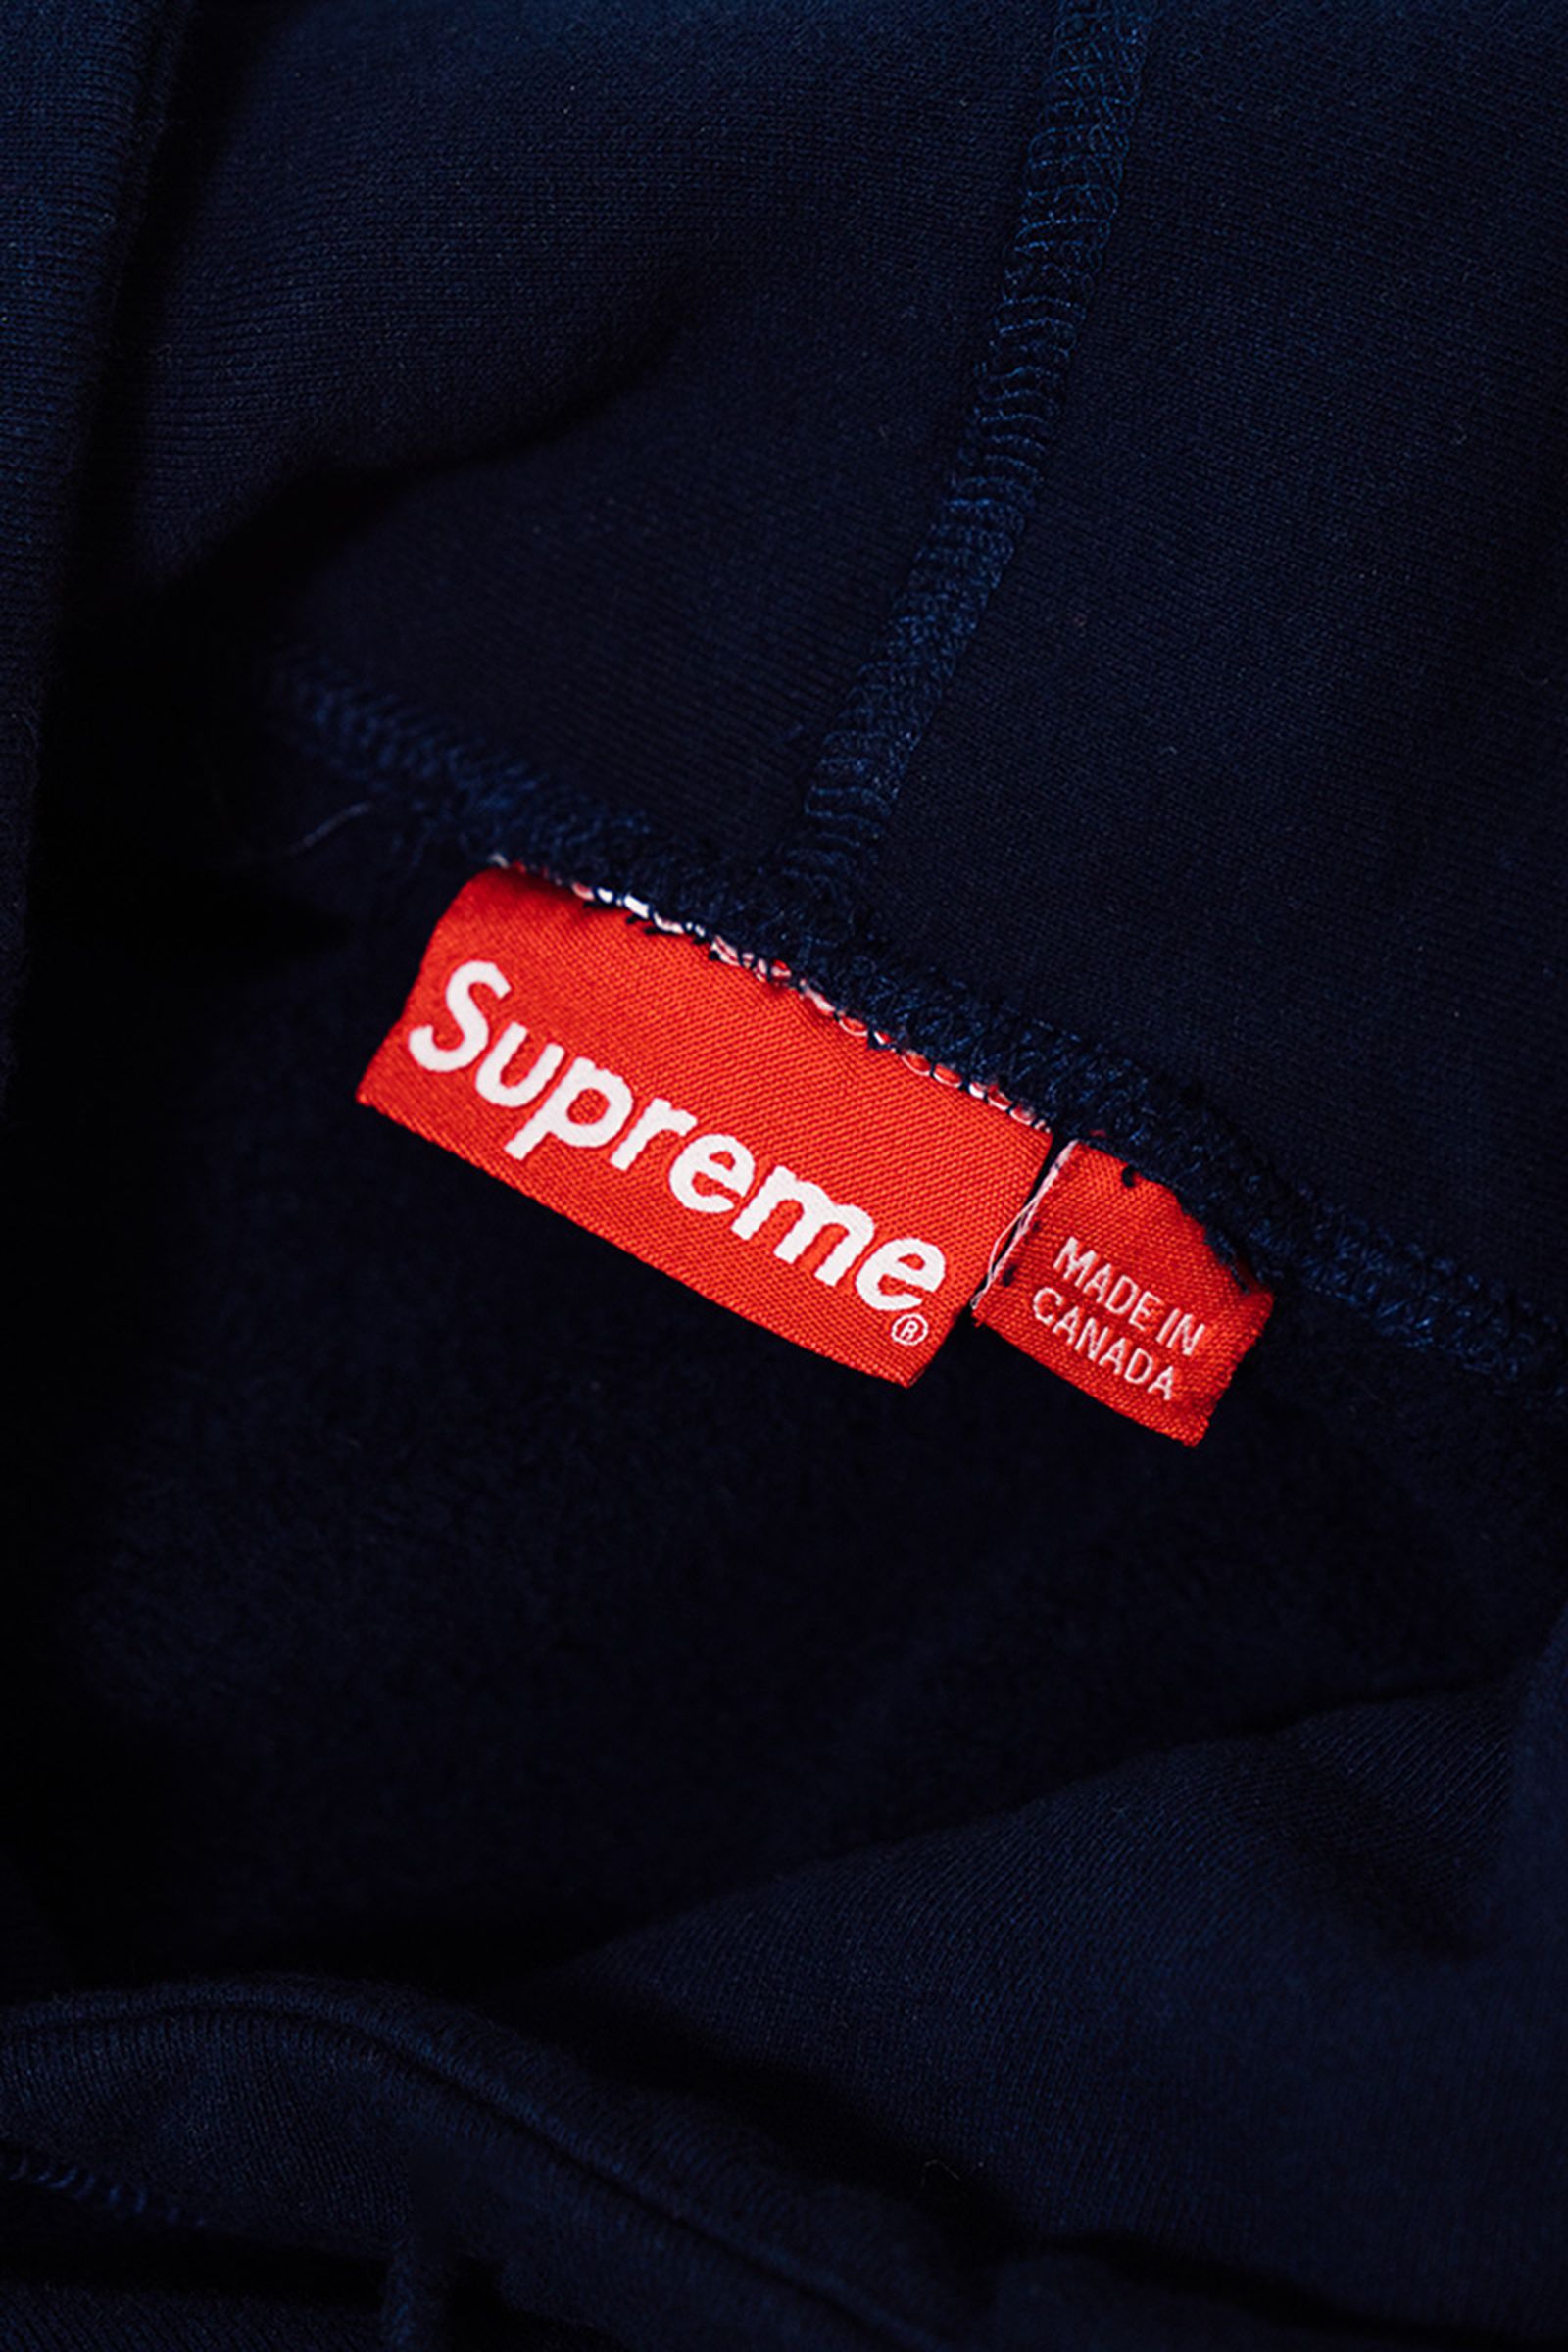 How to Spot Fake Supreme in 2020: A Guide | Highsnobiety